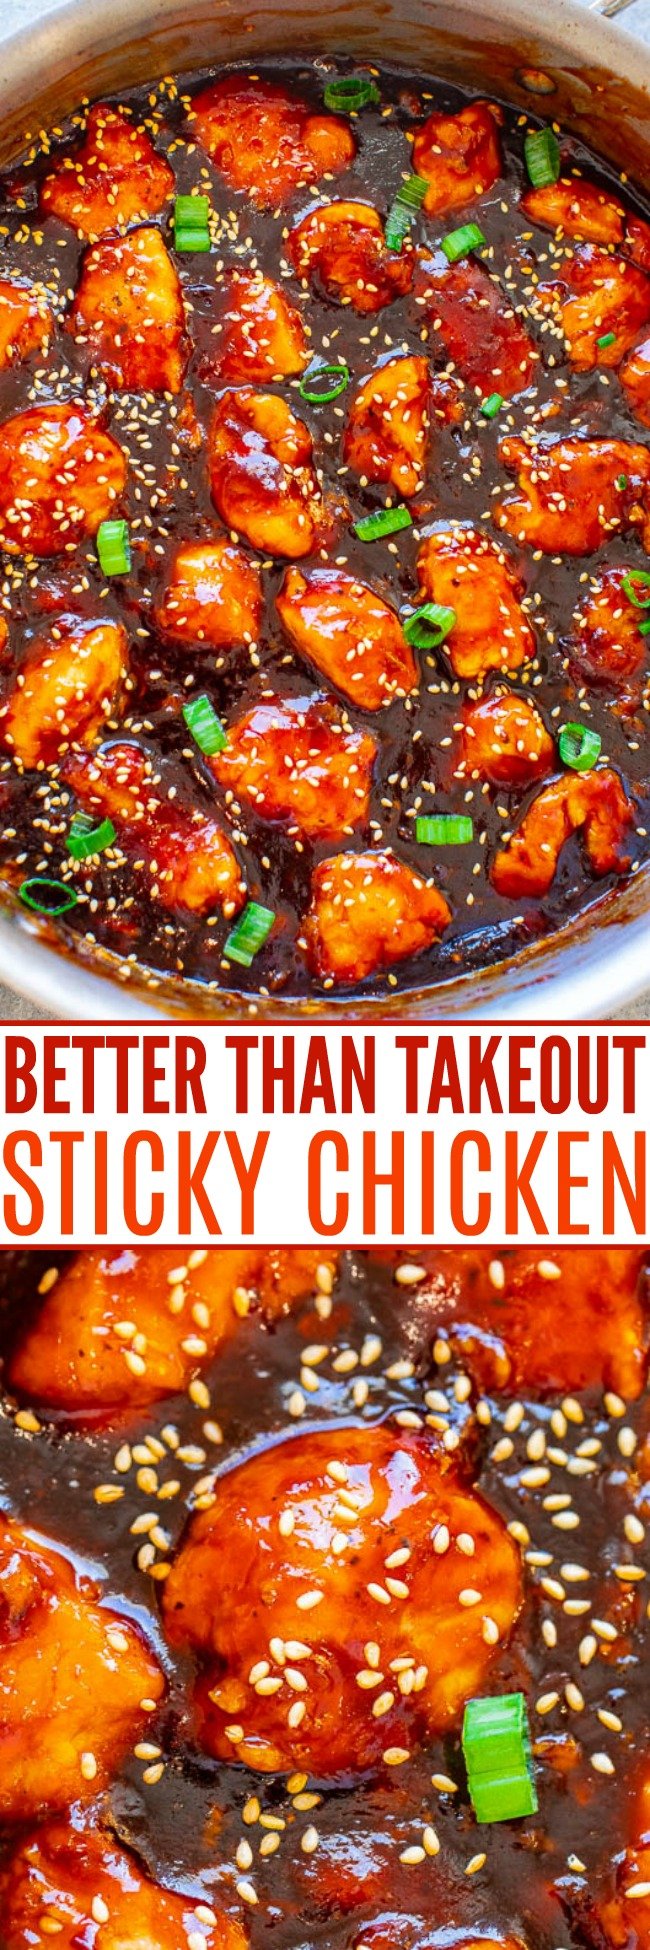 Better-Than-Takeout Sticky Chicken - Stop calling for takeout or going to the mall food court and make this AMAZING sticky chicken at home in 15 minutes!! So EASY with the perfect balance of sweet and spicy with plenty of sticky sauce!! 